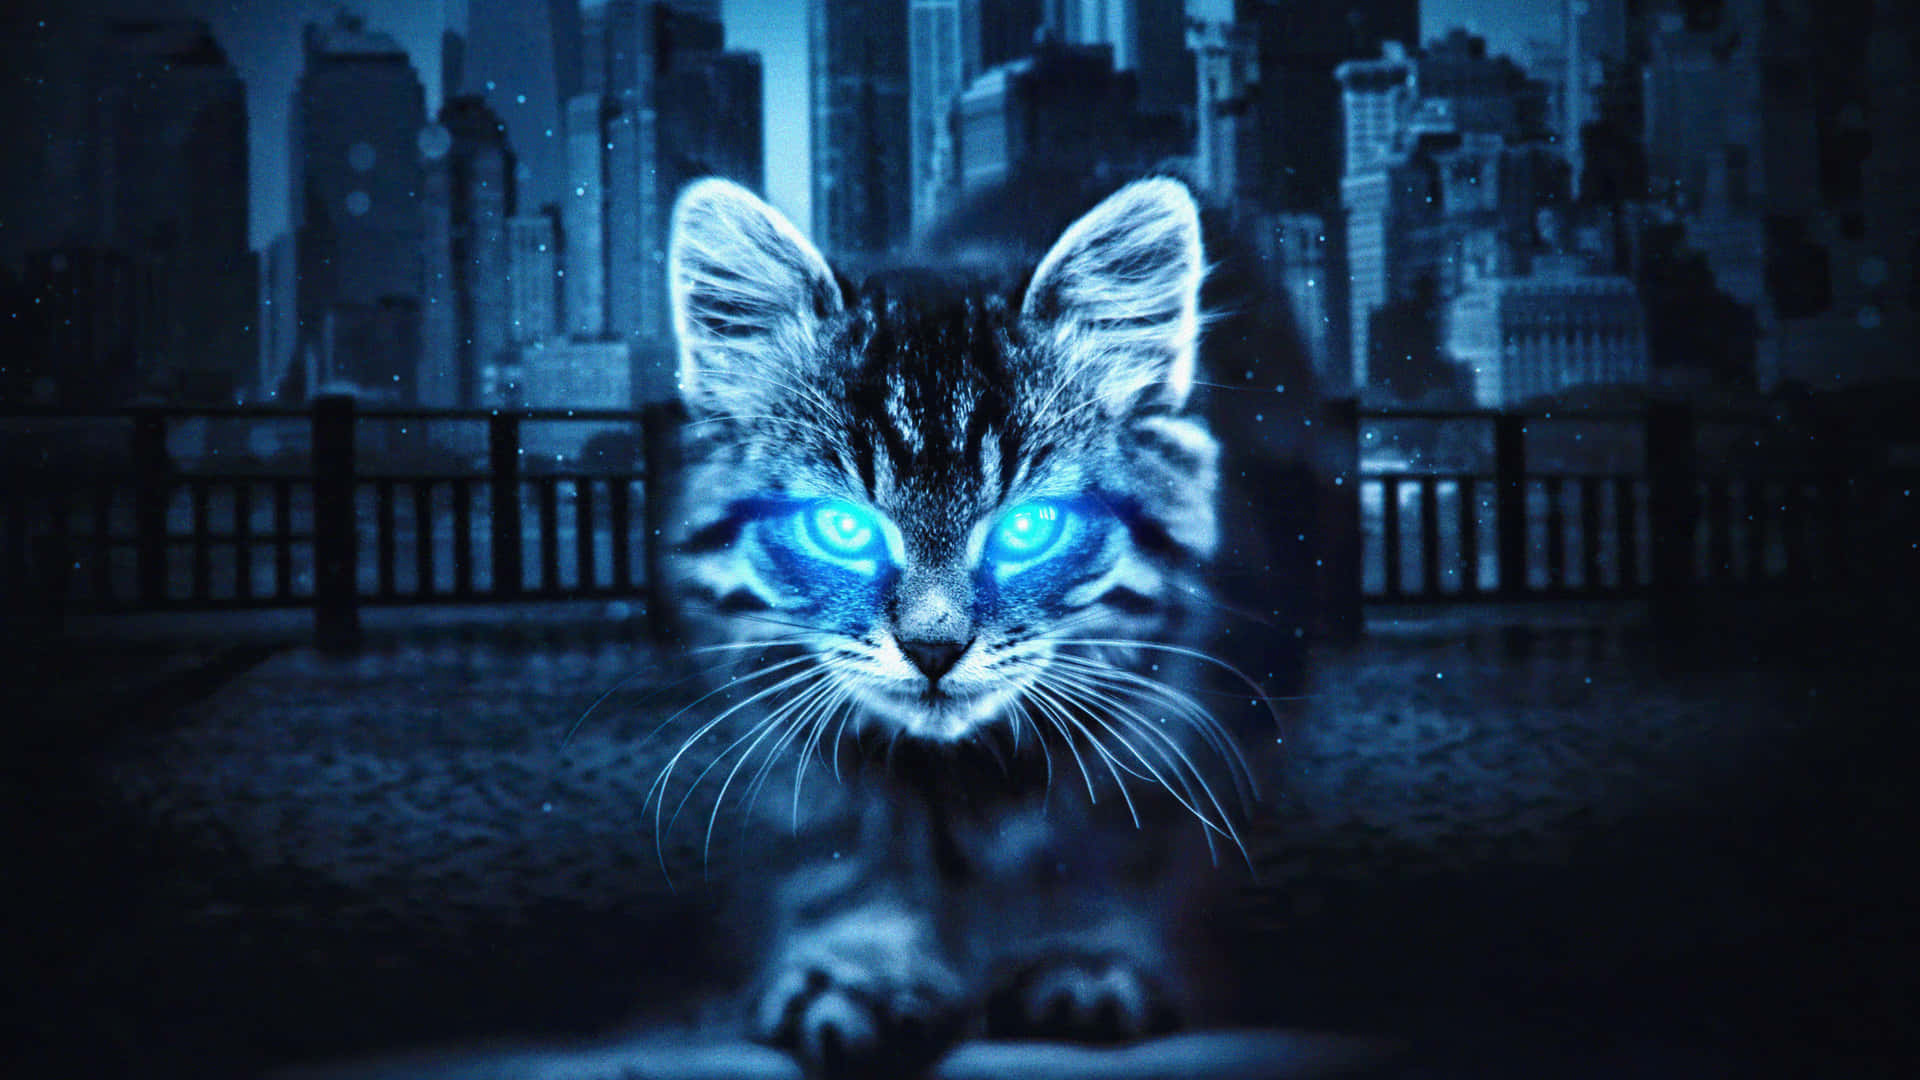 A Cat With Blue Eyes Walking In The Dark